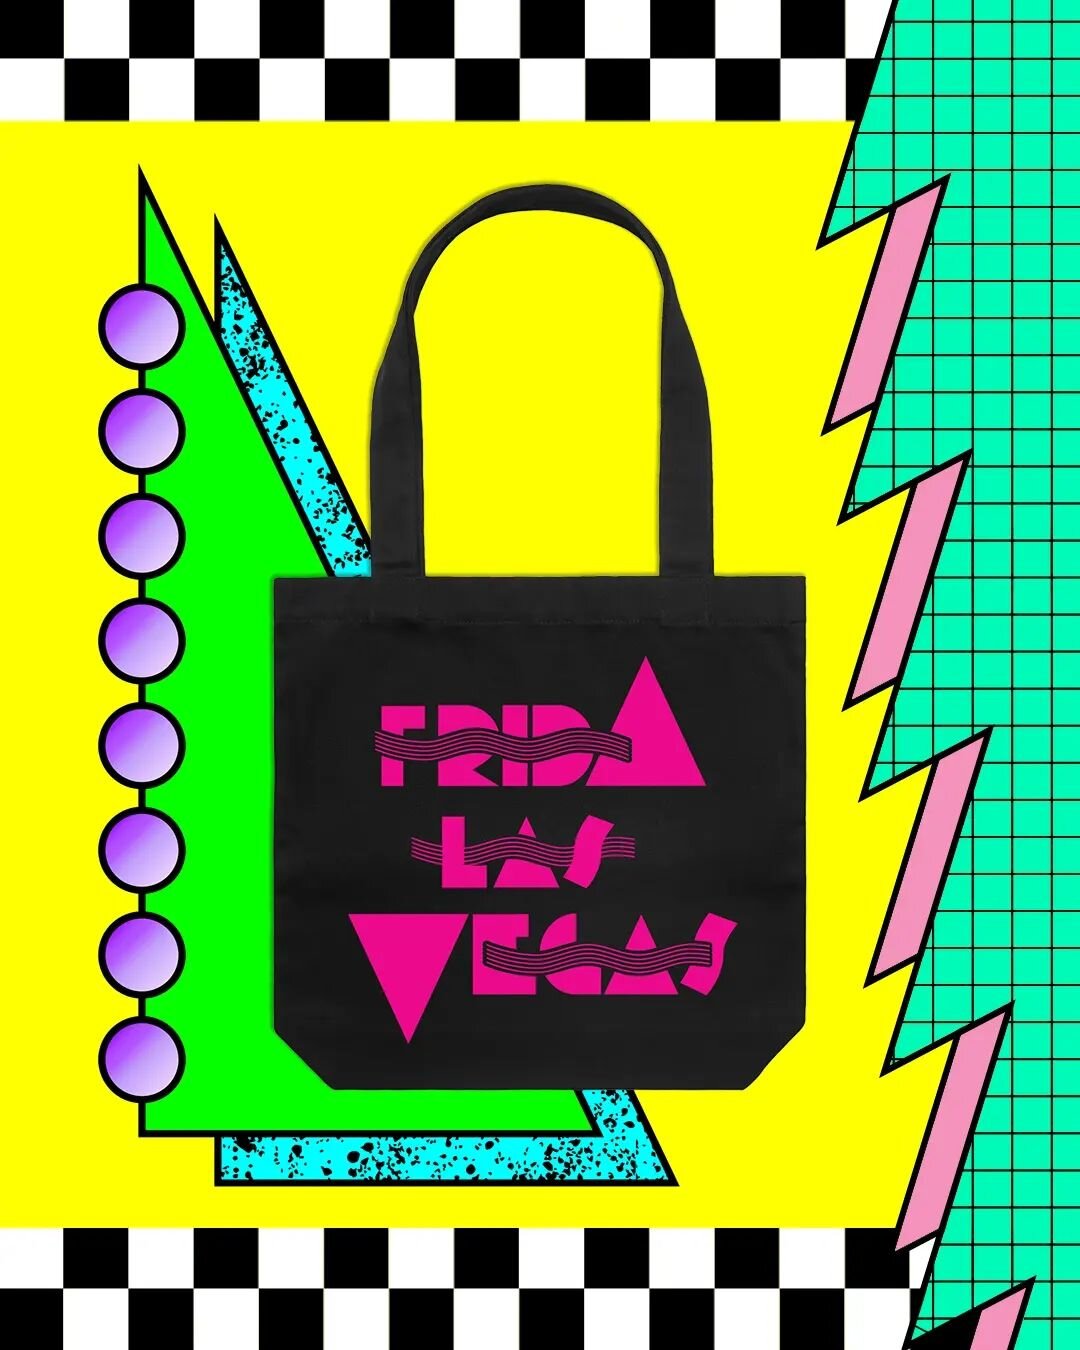 What's not 'tote' love about a bag that fits all your poop in one place❗🛍️❗Shop the new @fridalasvegas 'New Wave' logo bag inspired by hair gel packaging of yore (if you know, you know 🪮)

Hand screenprinted by @carizza_designs_theprintroom in lusc